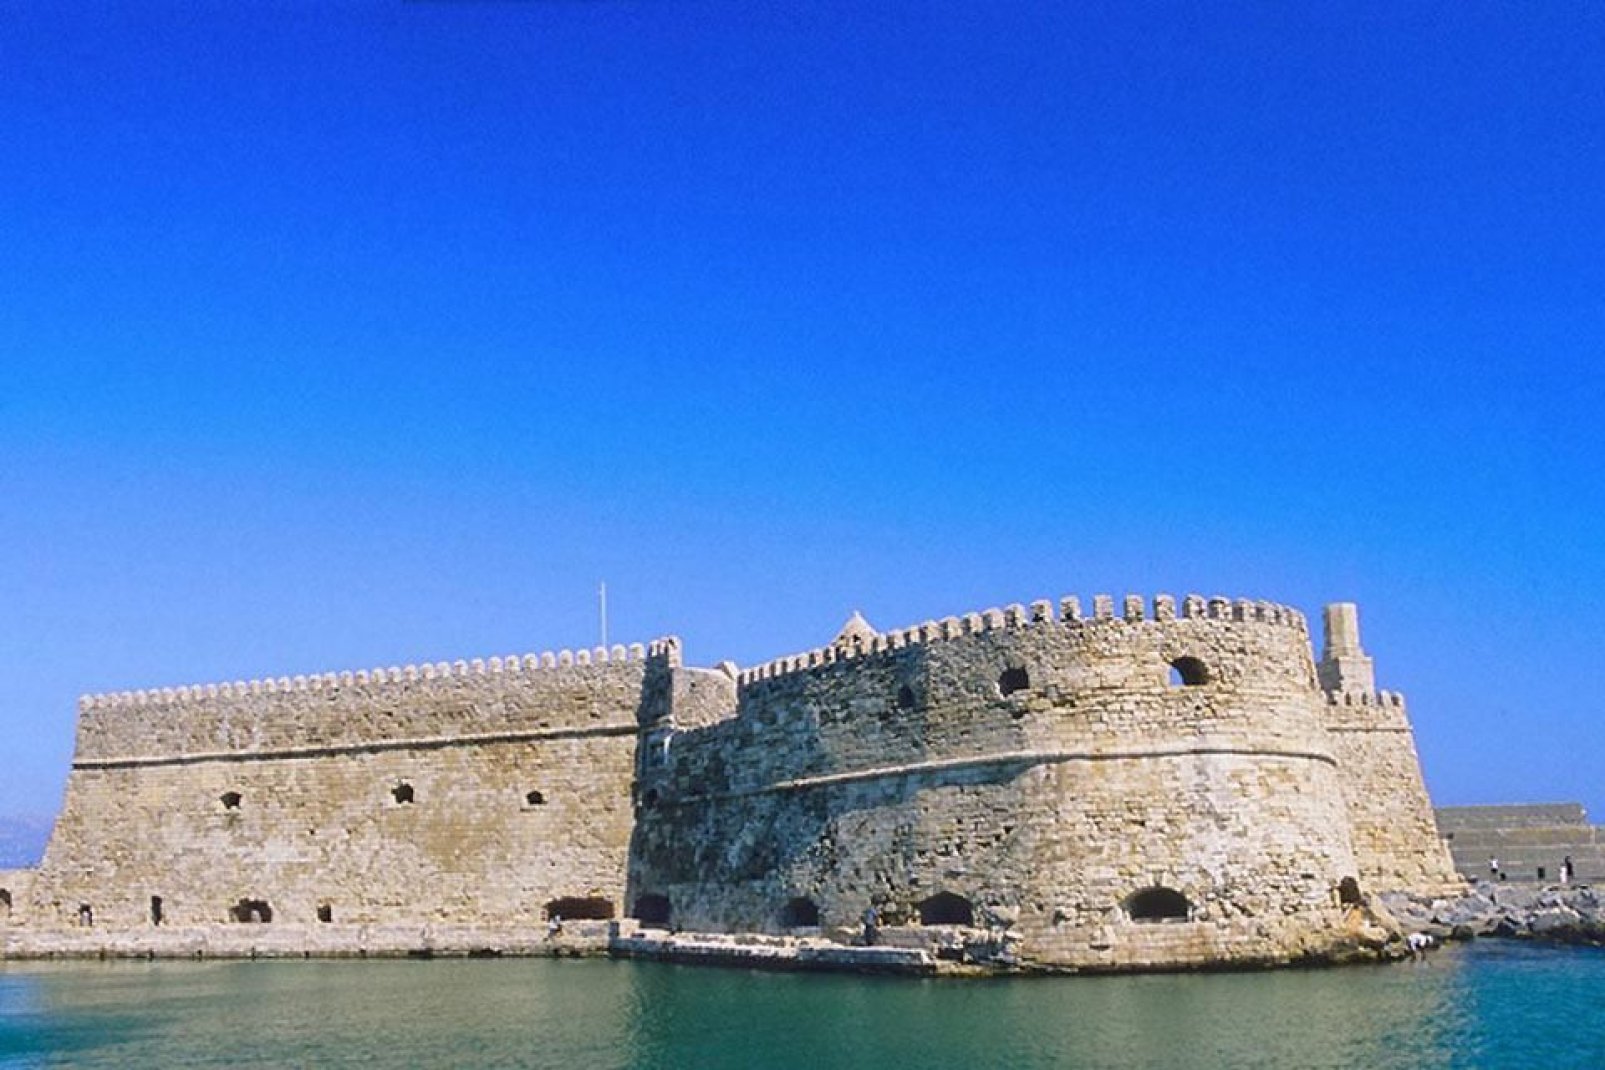 In the tumultuous history of the city, the Venetian Fort recalls the Venetian invasion in the thirteenth century.